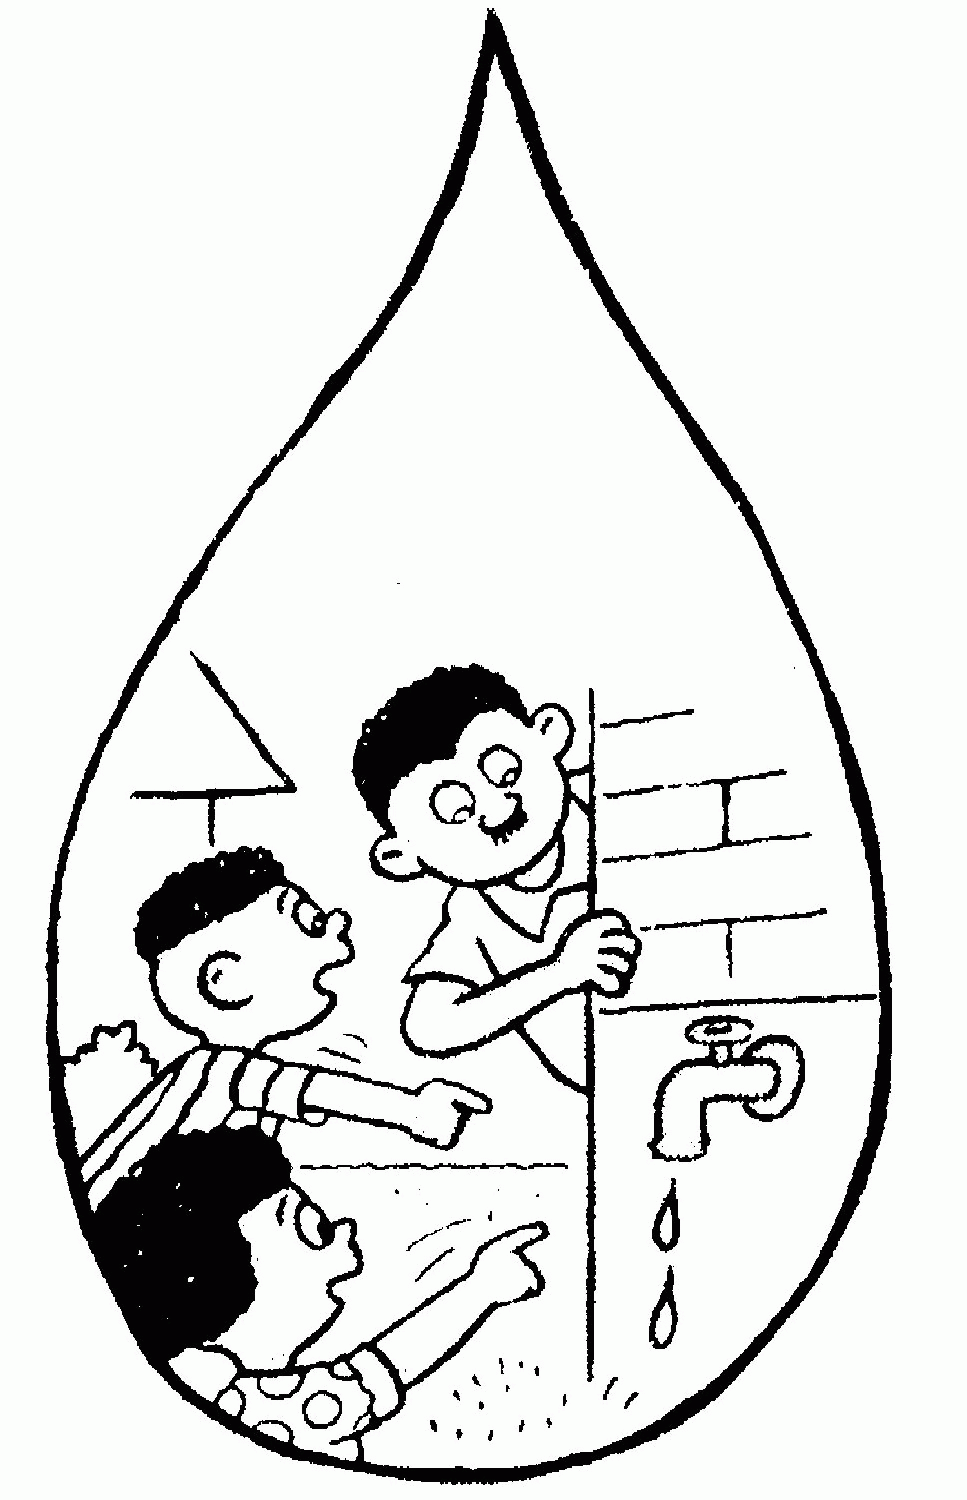 Water Conservation Coloring Page